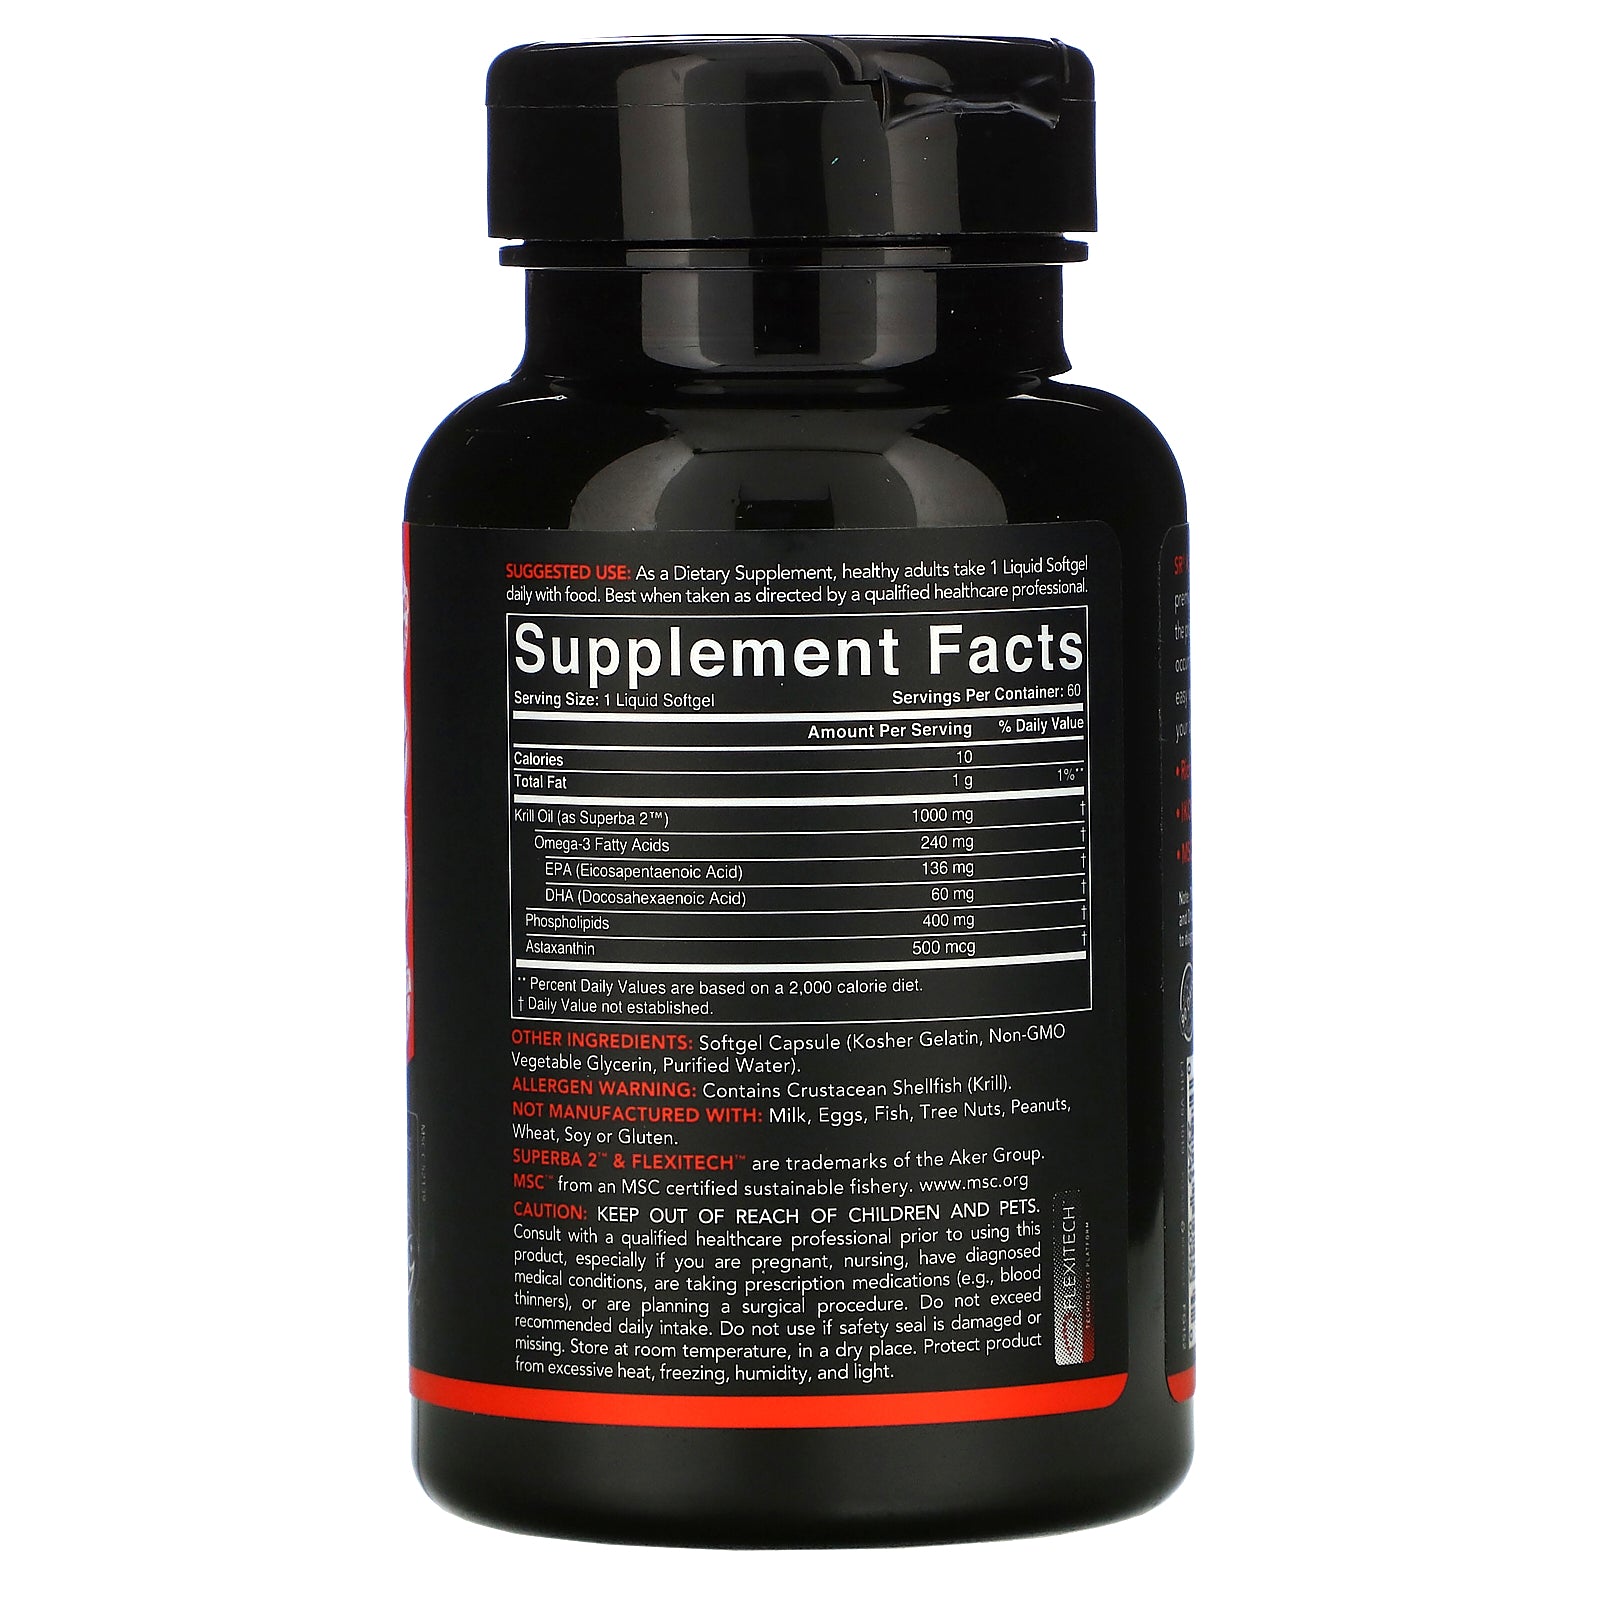 Sports Research, SUPERBA 2 Antarctic Krill Oil with Astaxanthin, 1,000 mg, 60 Softgels